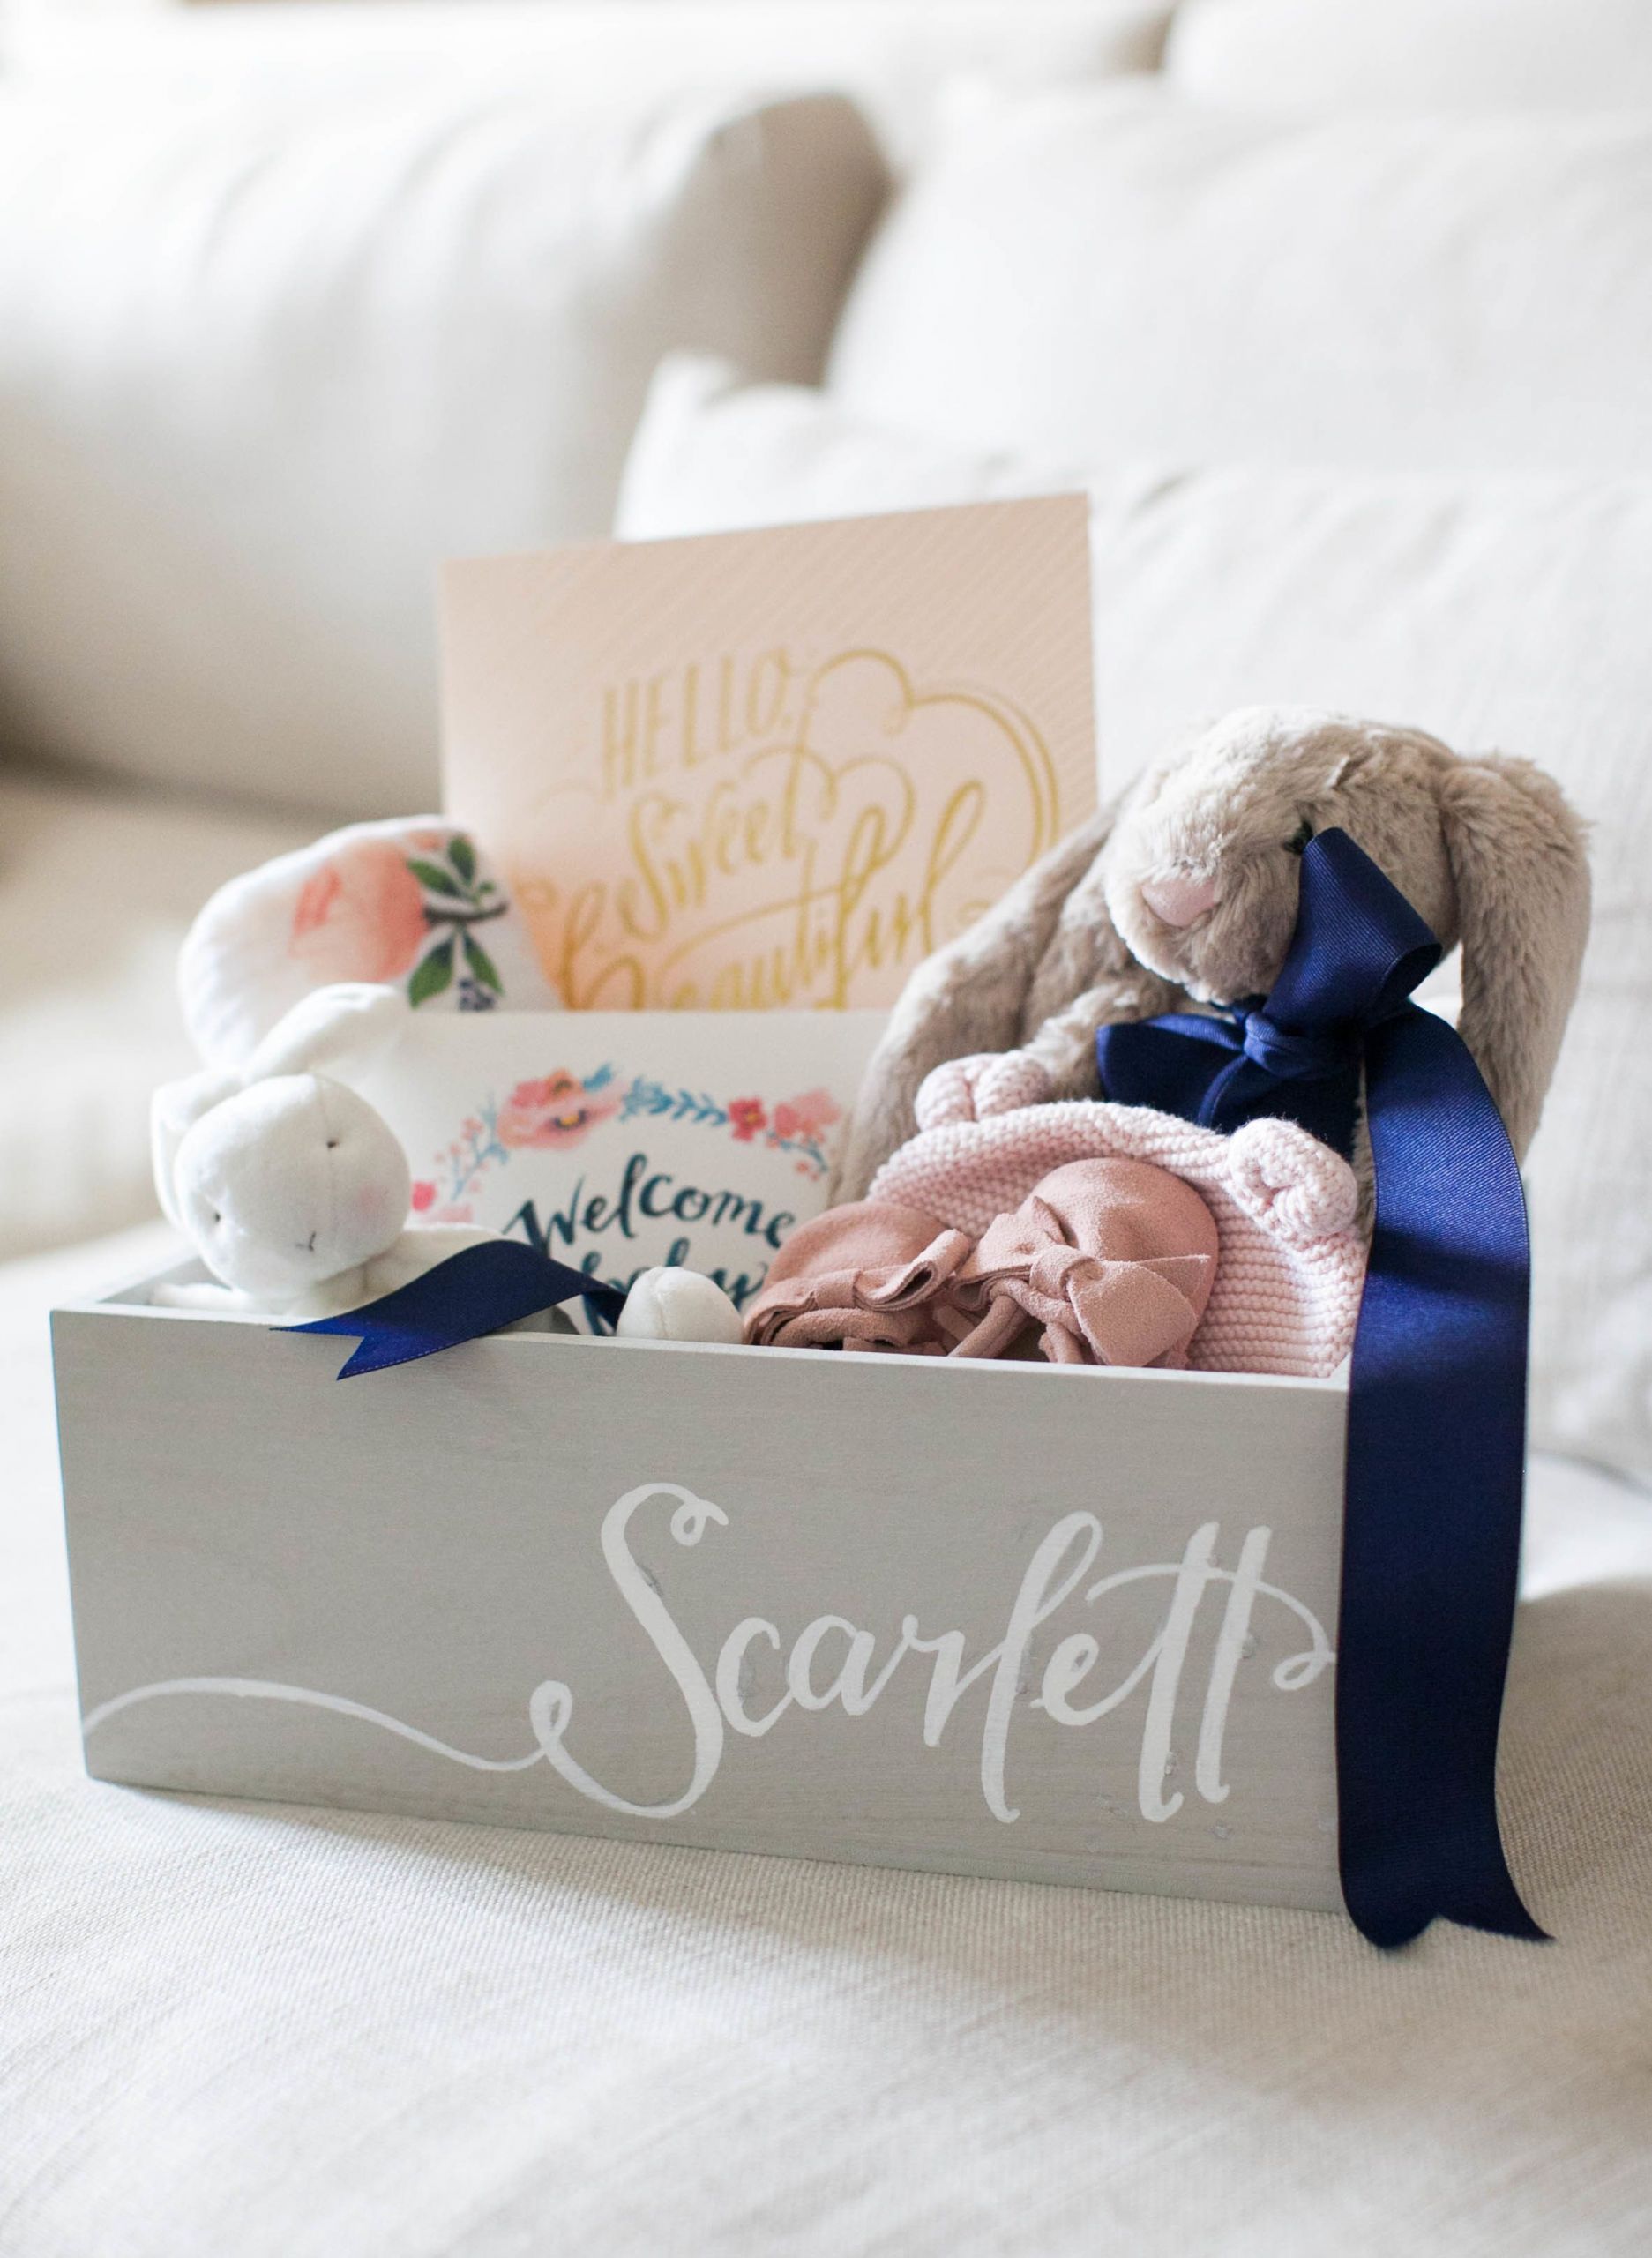 Baby Shower Gifts For Parents
 19 f the Registry Baby Shower Gifts the Parents to be